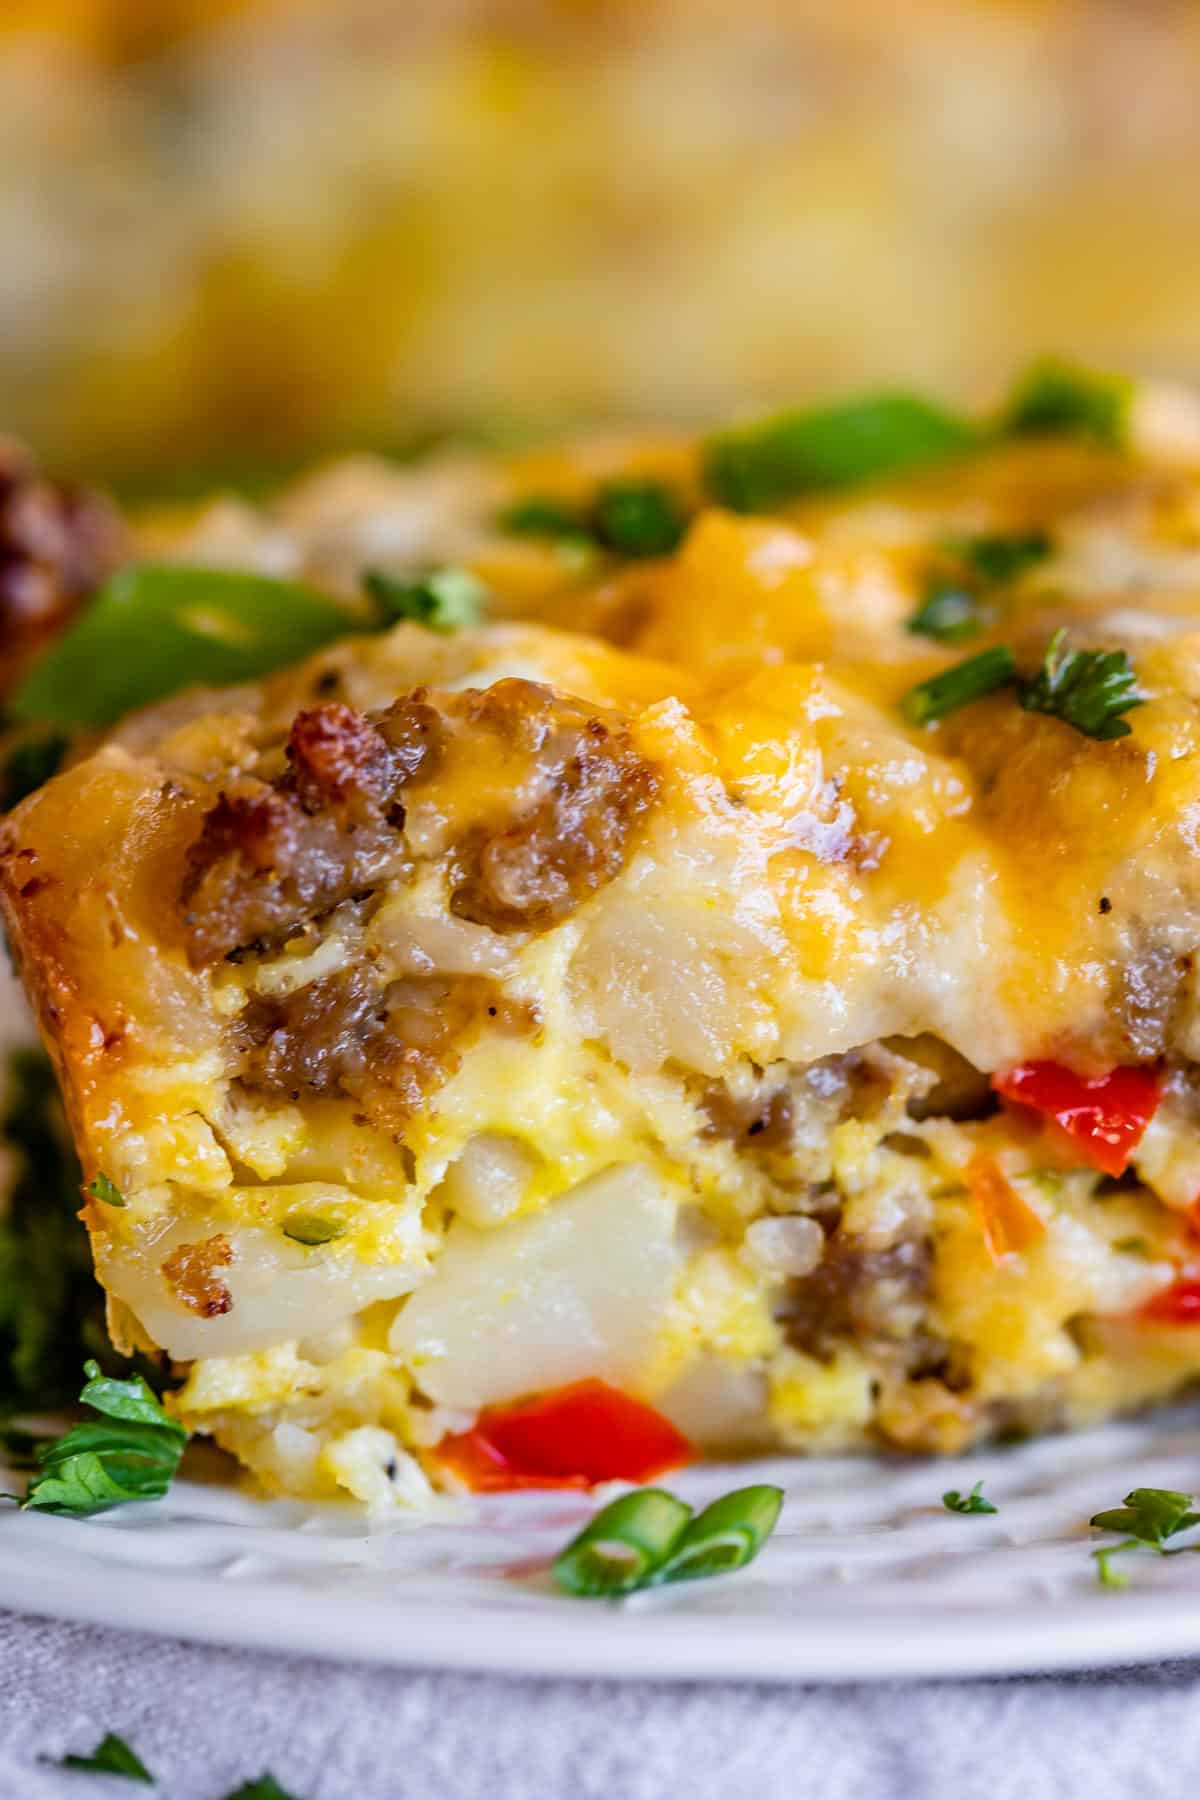 Easy Overnight Breakfast Casserole with Sausage - The Food Charlatan